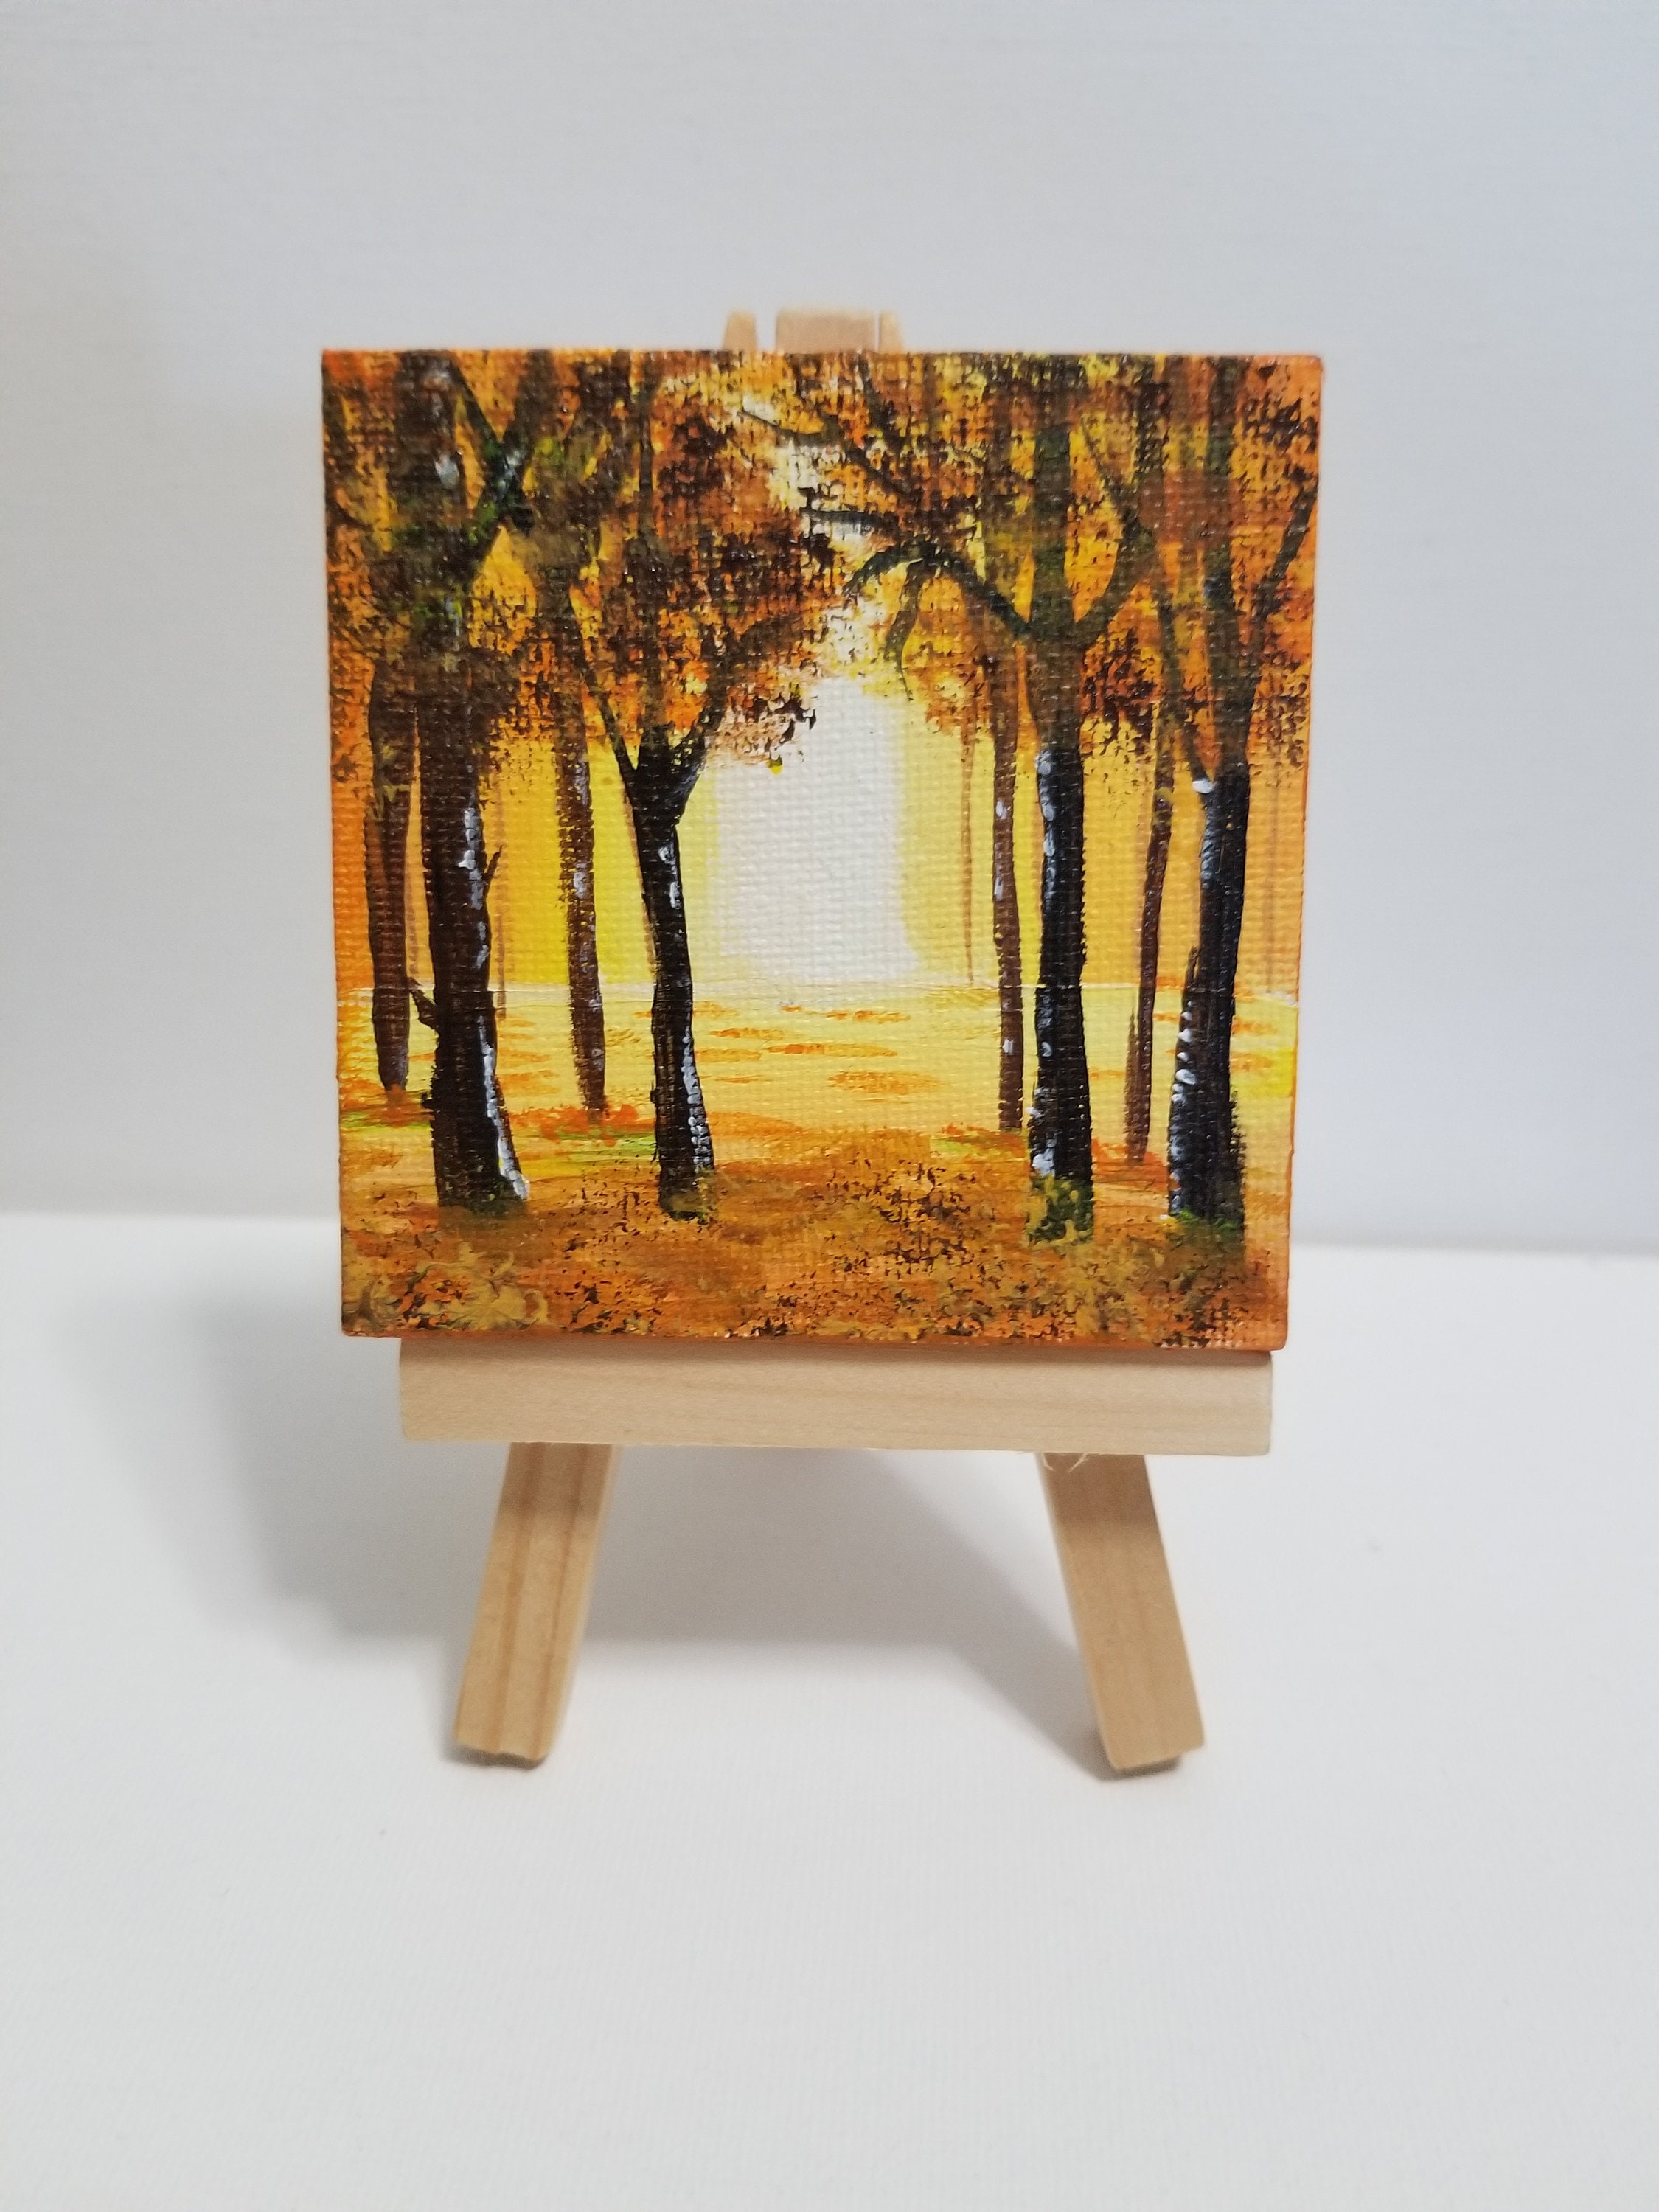 Wooden Easel 7 1/2 Miniature Canvas Holder, Hand Made Favor Place